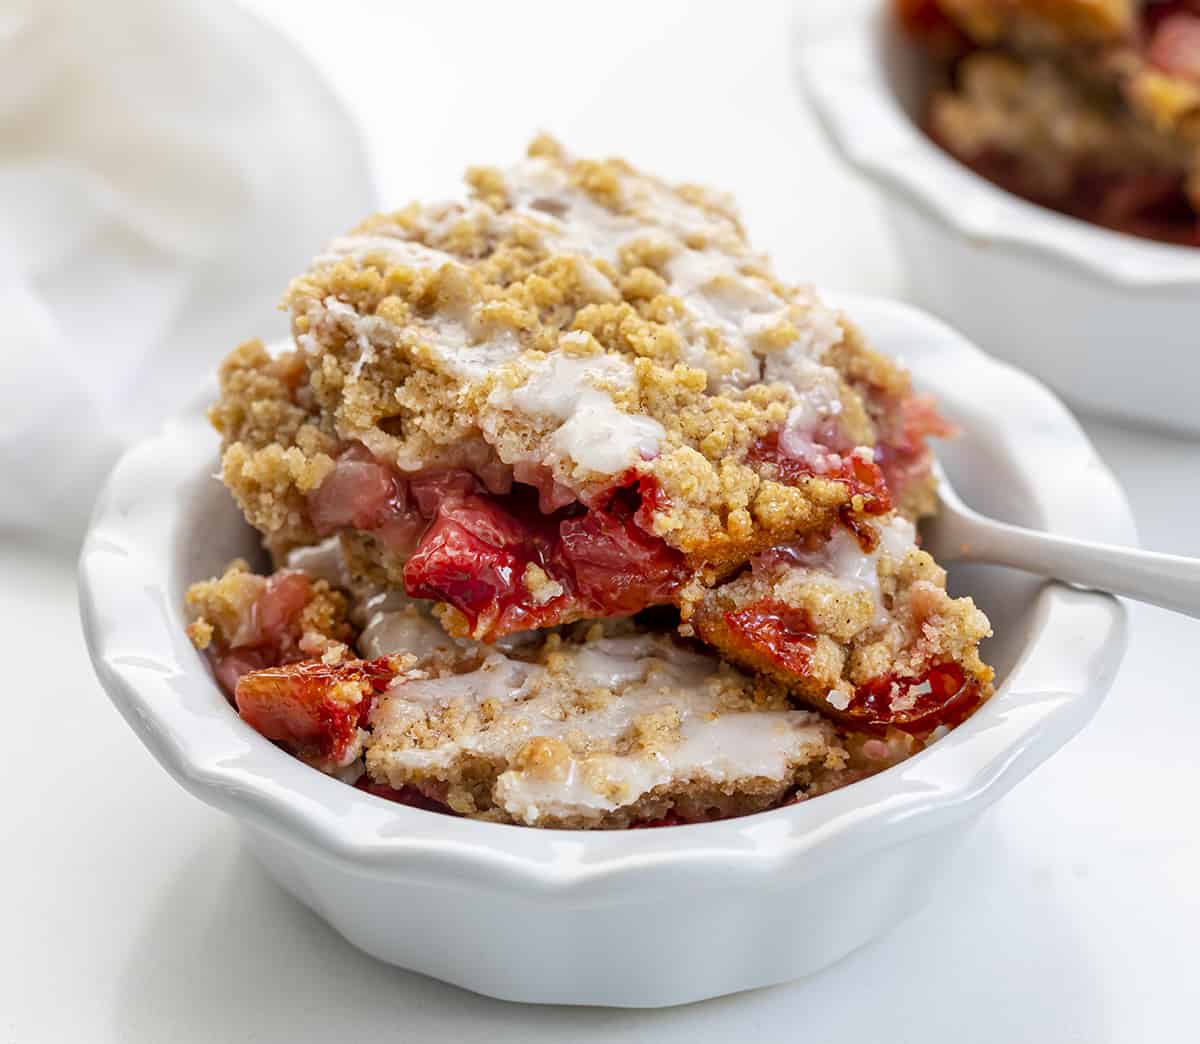 Bowl of Skillet Strawberry Crumble